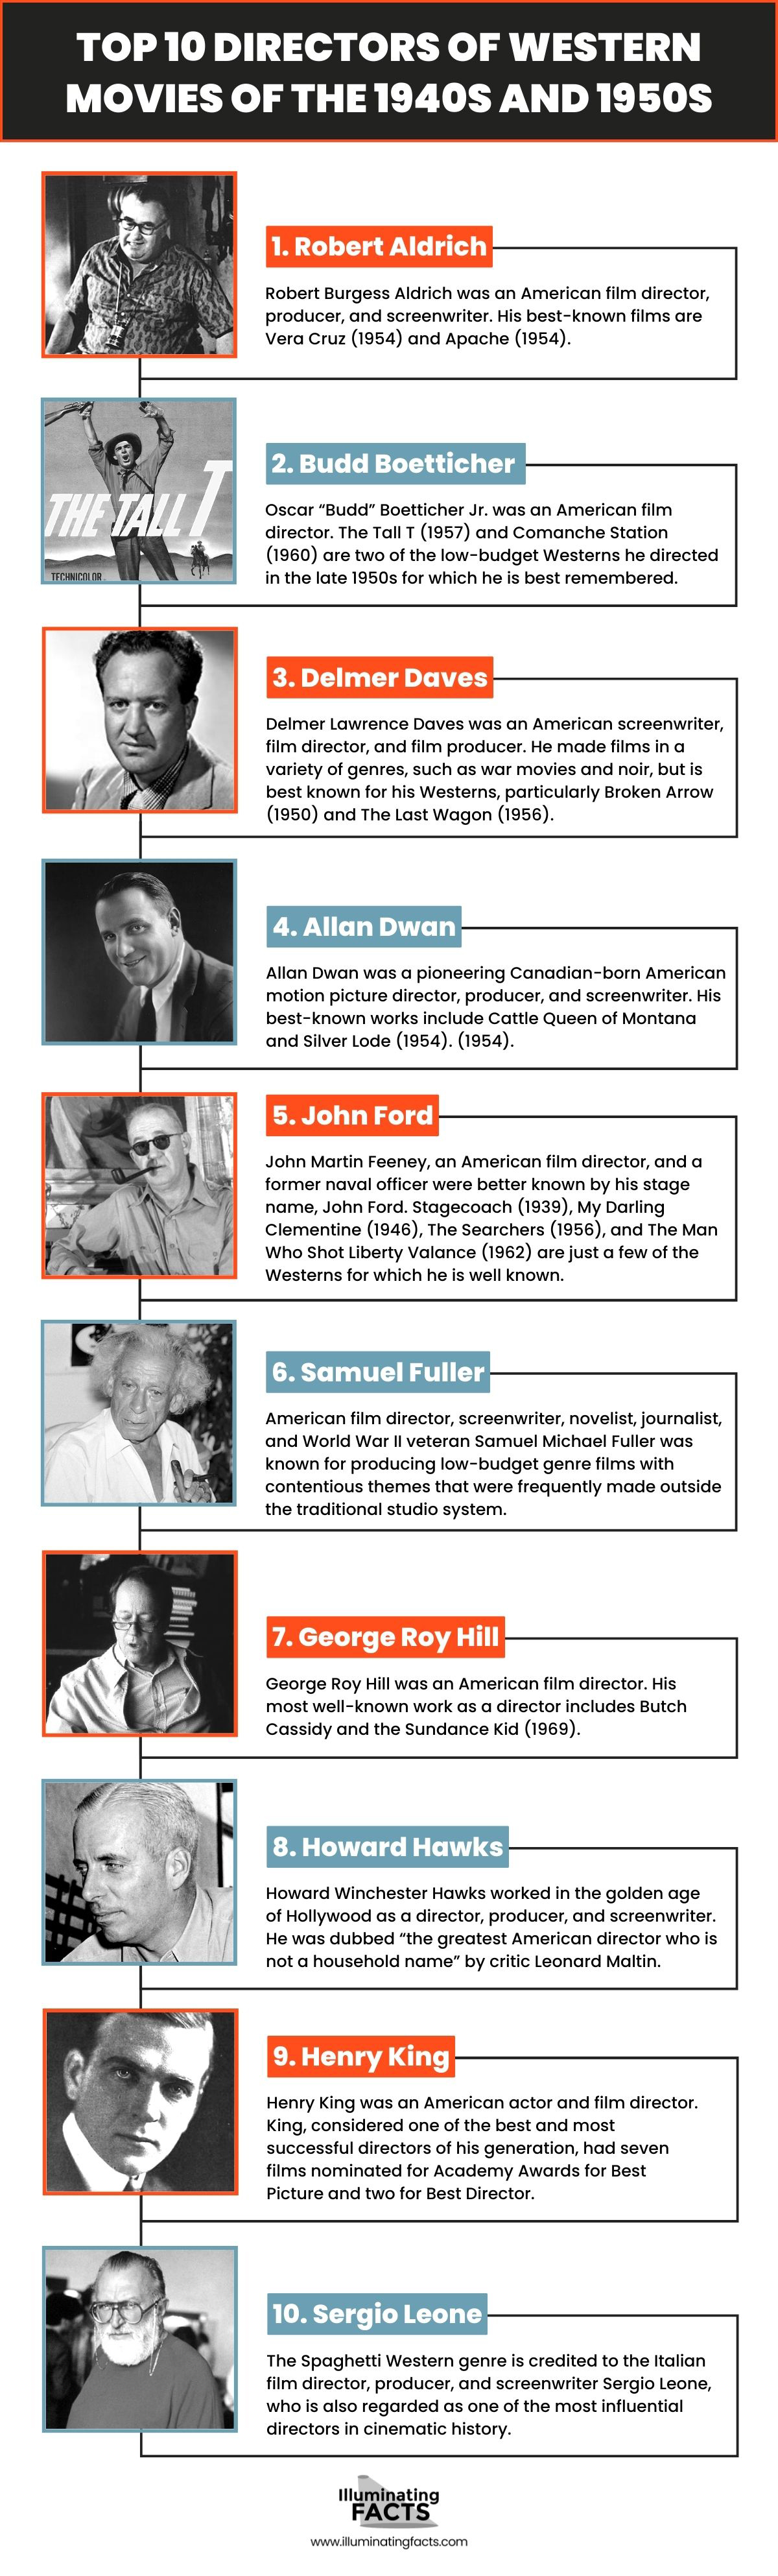 Top 10 Directors of Western movies of the 1940s and 1950s